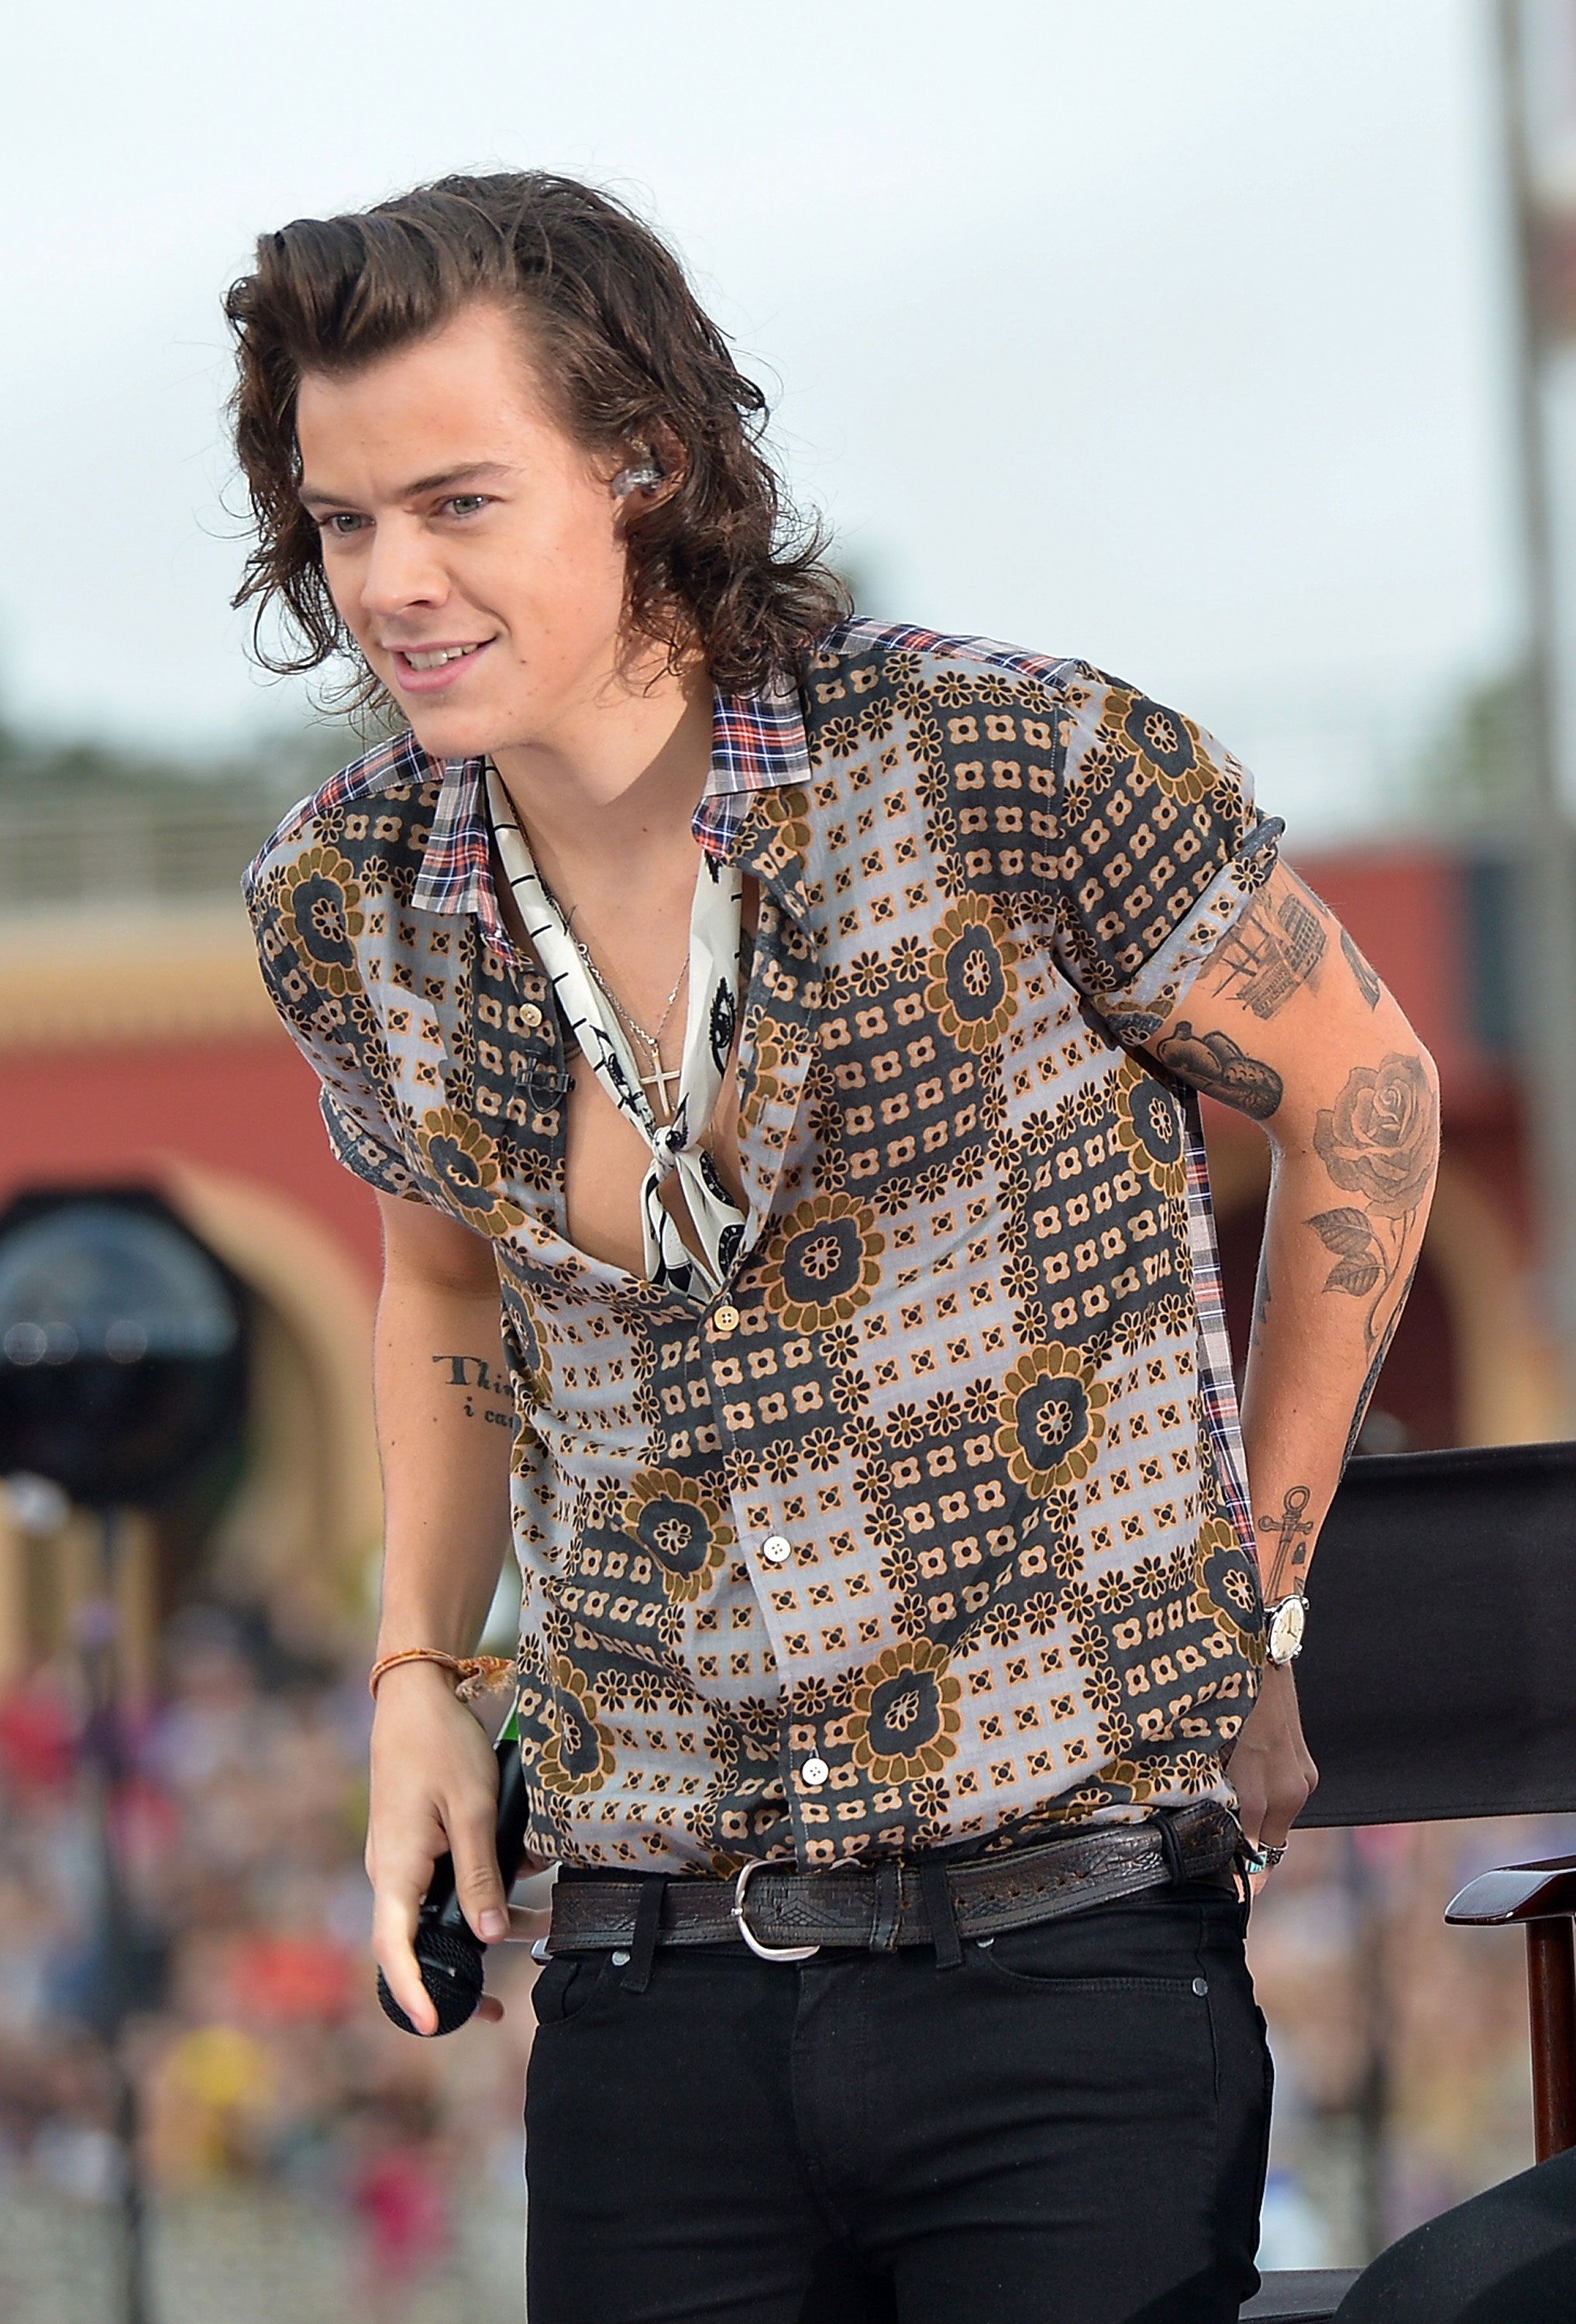 Harry Styles at 28: Looking back at the singer's fashion evolution